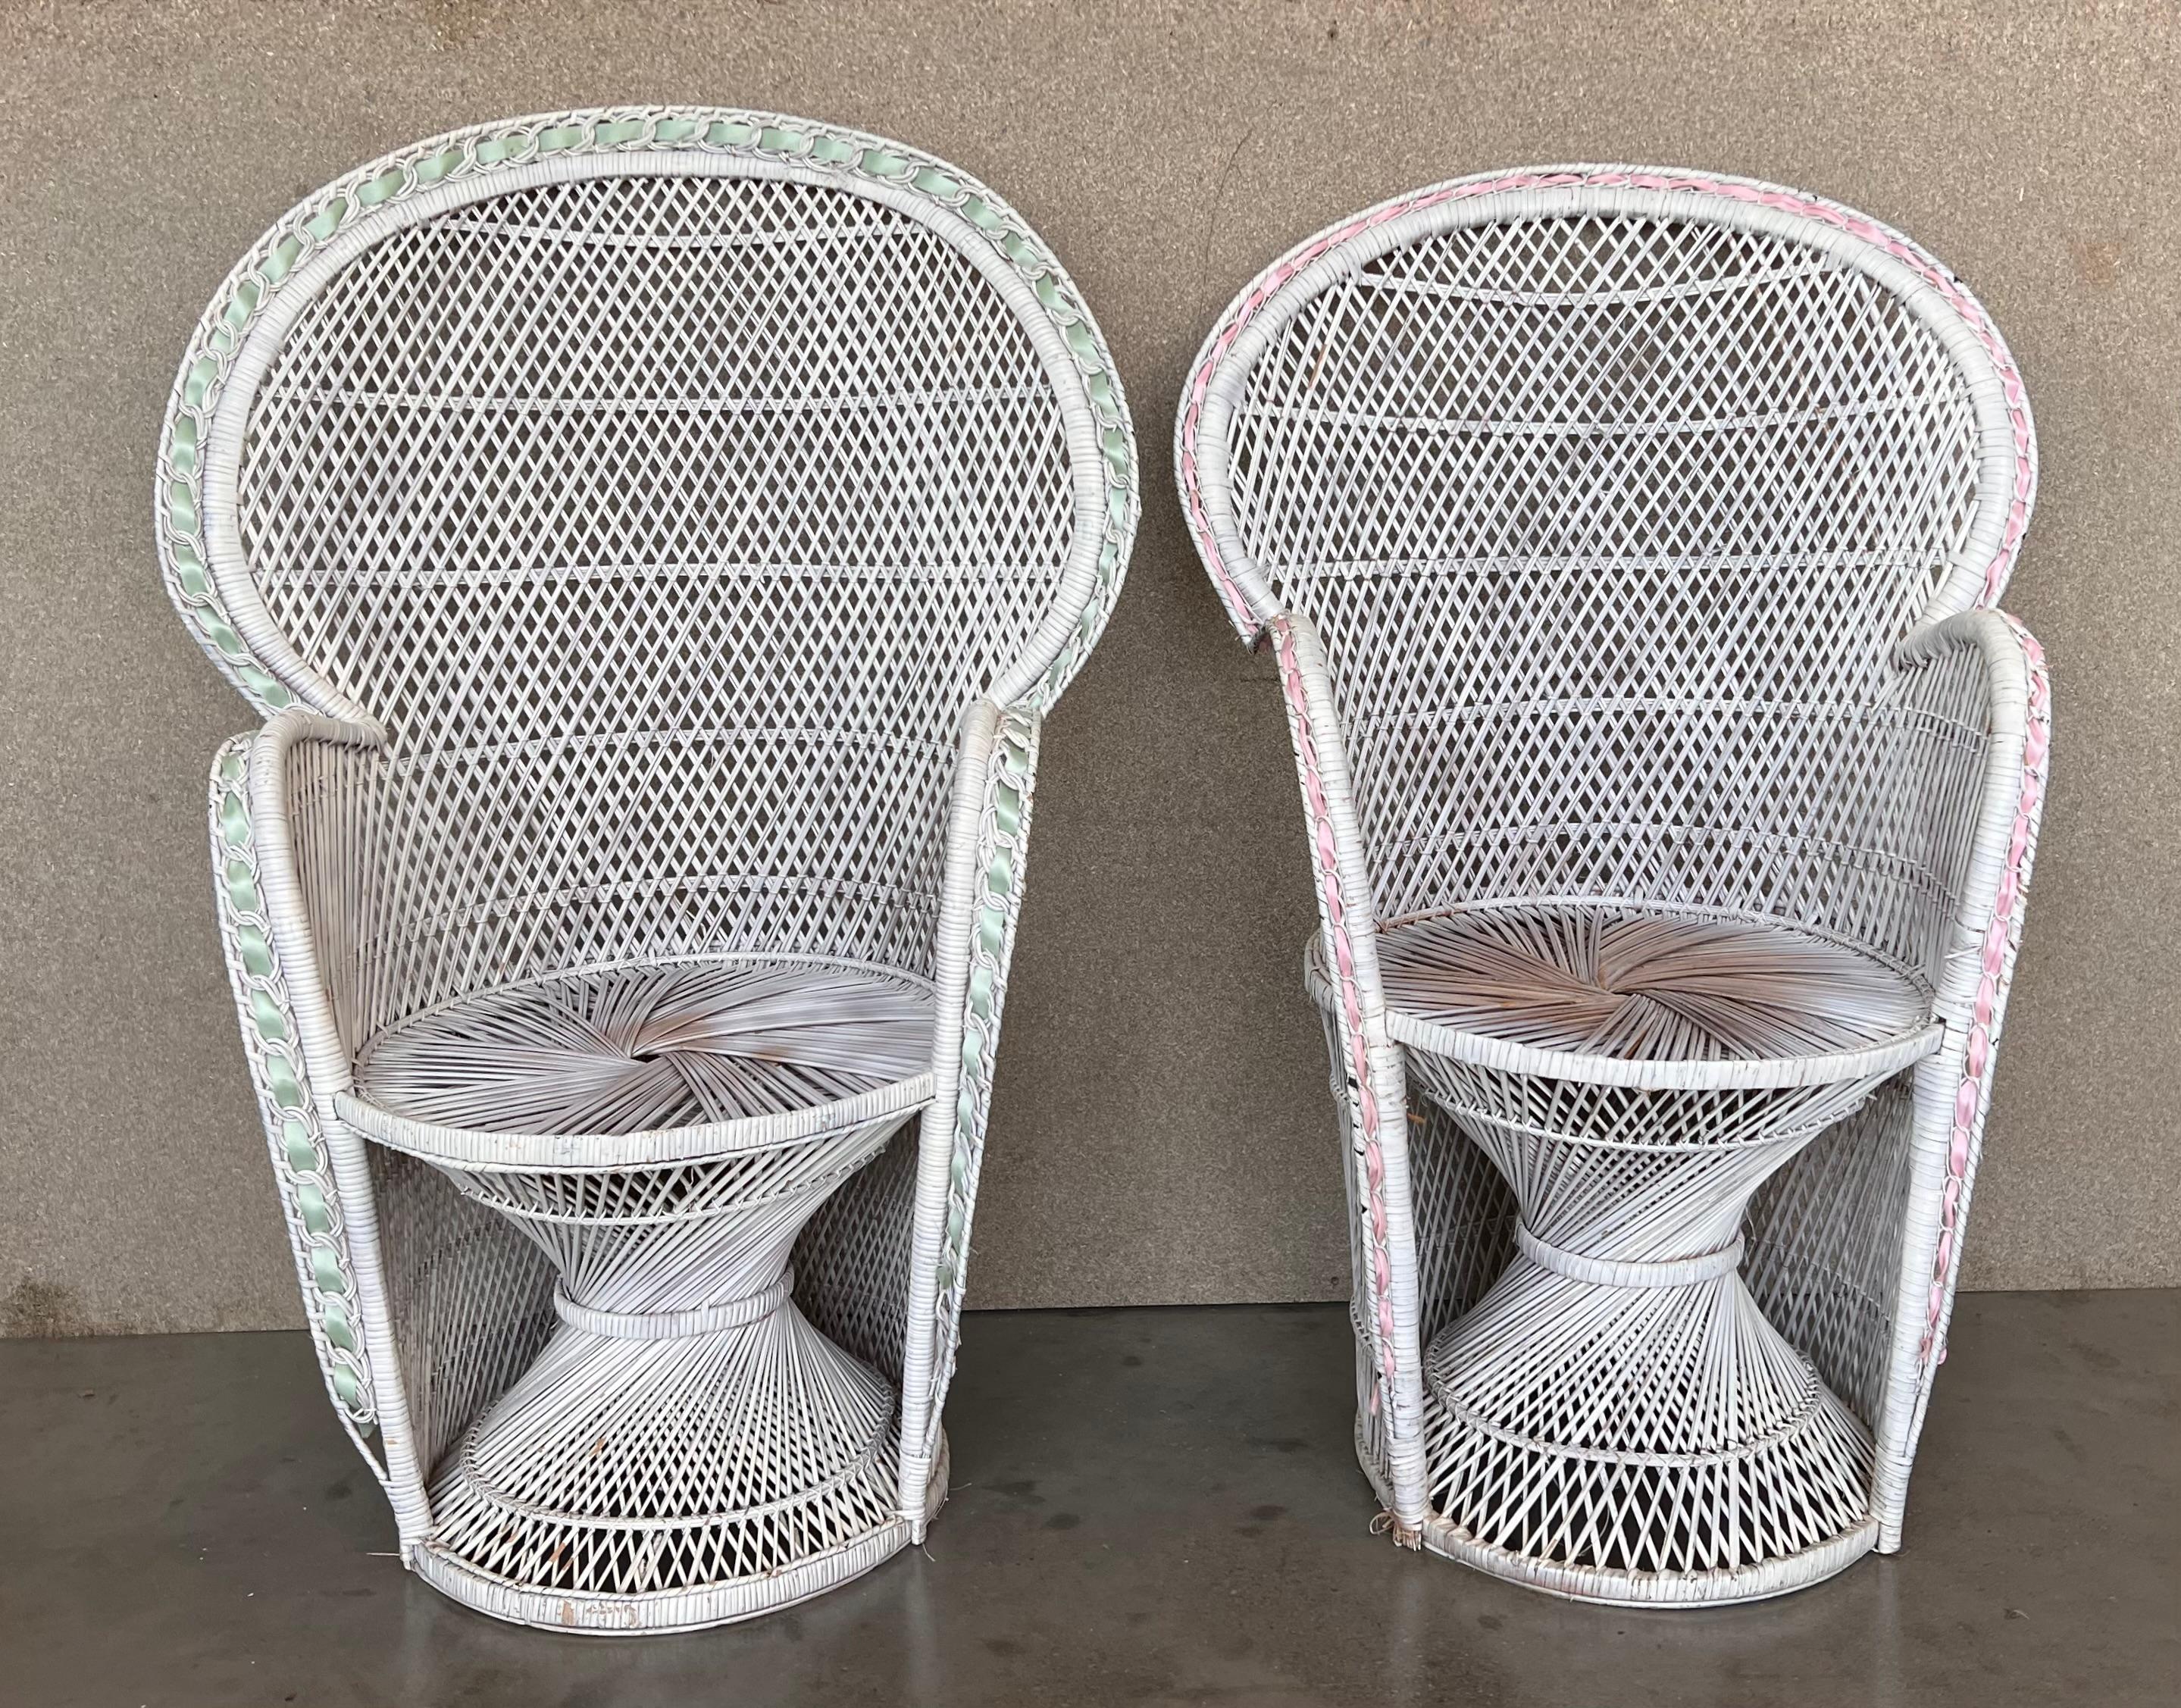 Vintage wicker peacock chair features a fine cross-weave pattern and intricate black rattan detailing. Twisted design base and large fan back. Very good condition with minor imperfections consistent with age. May exhibit scuffs, marks, or wear, see